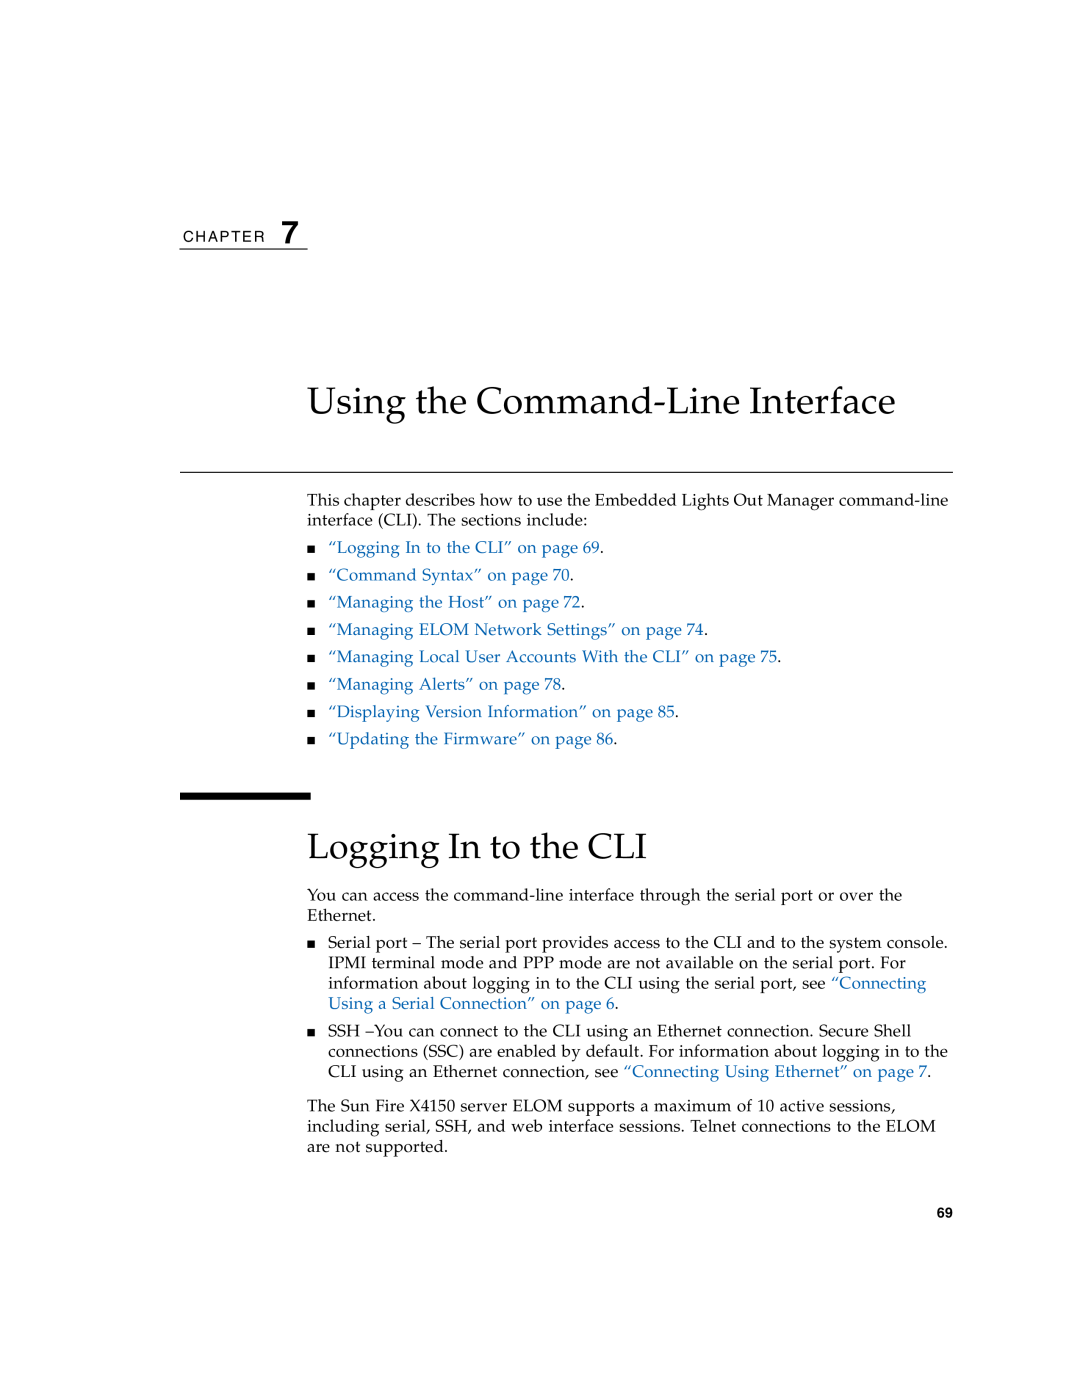 Sun Microsystems X4150 manual Using the Command-Line Interface, Logging In to the CLI, “Updating the Firmware” on page 